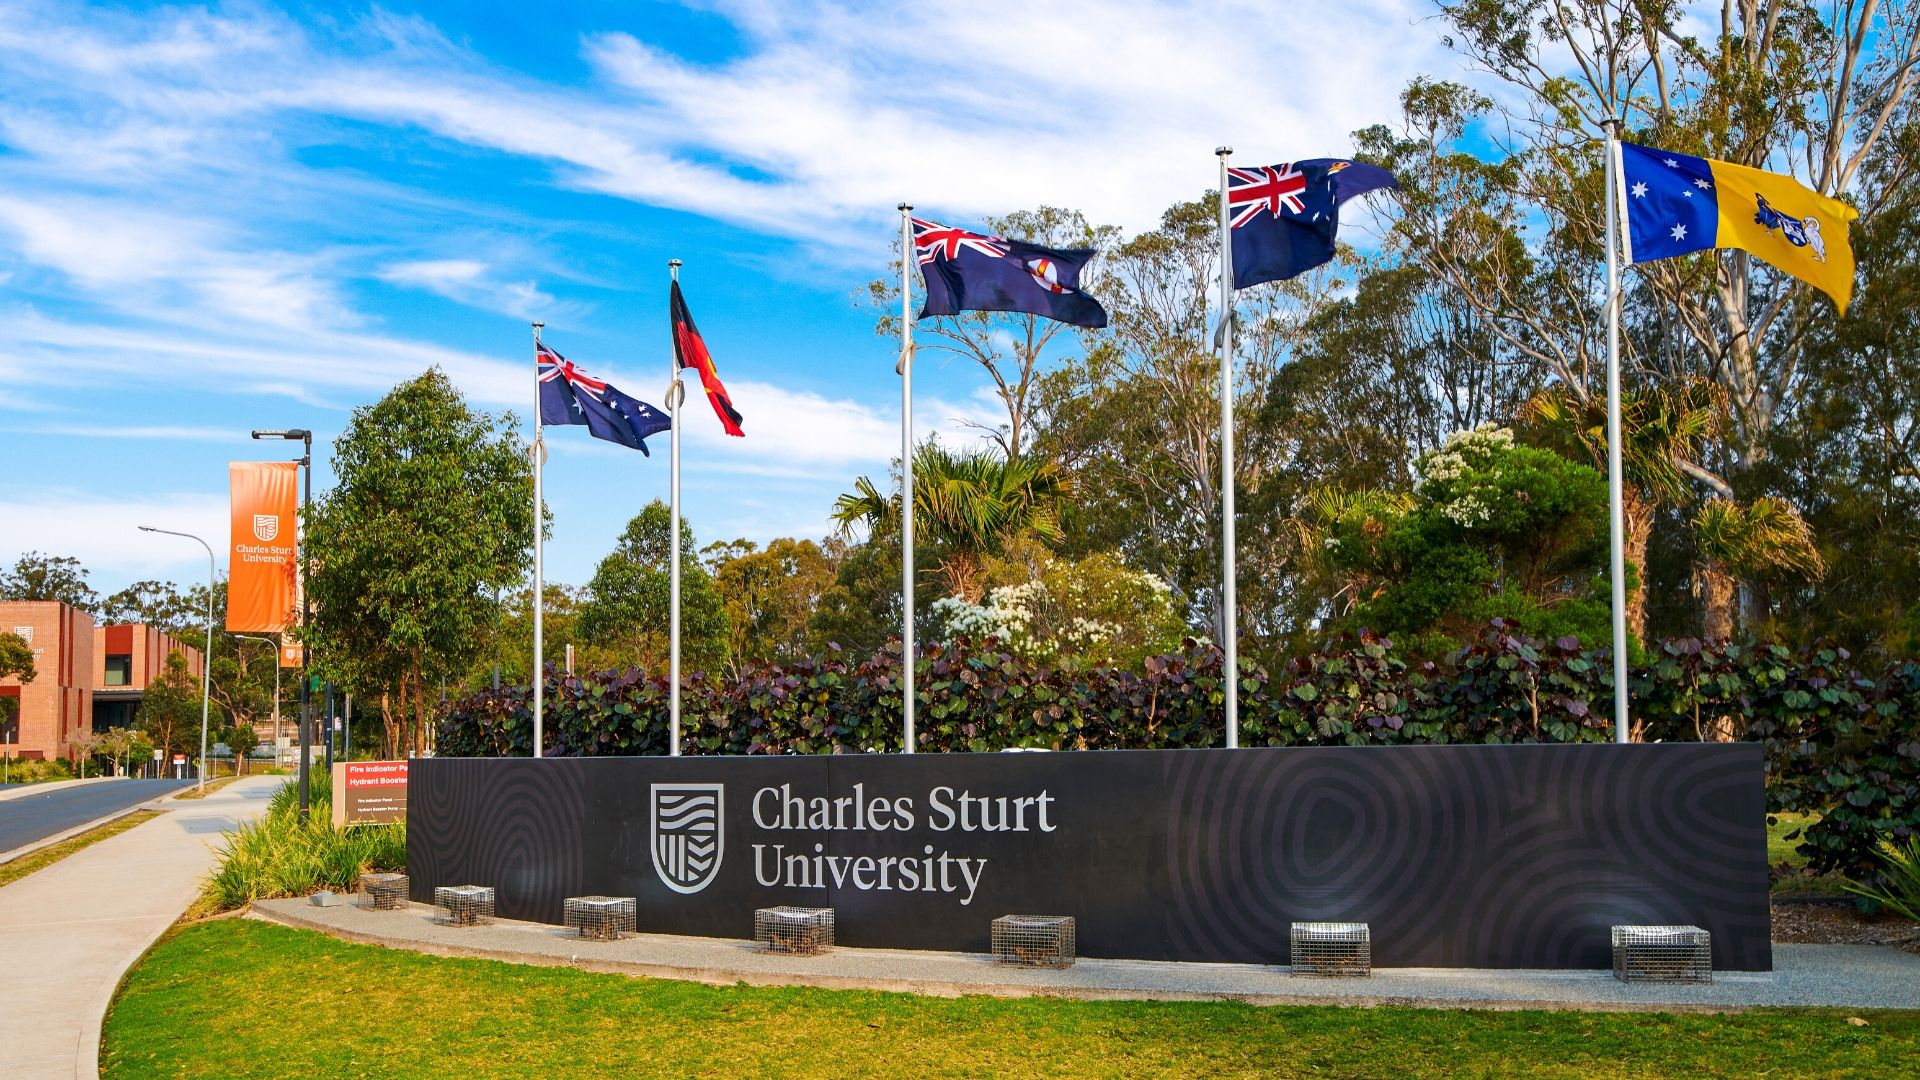 [Case study] Relocate files and records from the Charles Sturt University’s archival facility